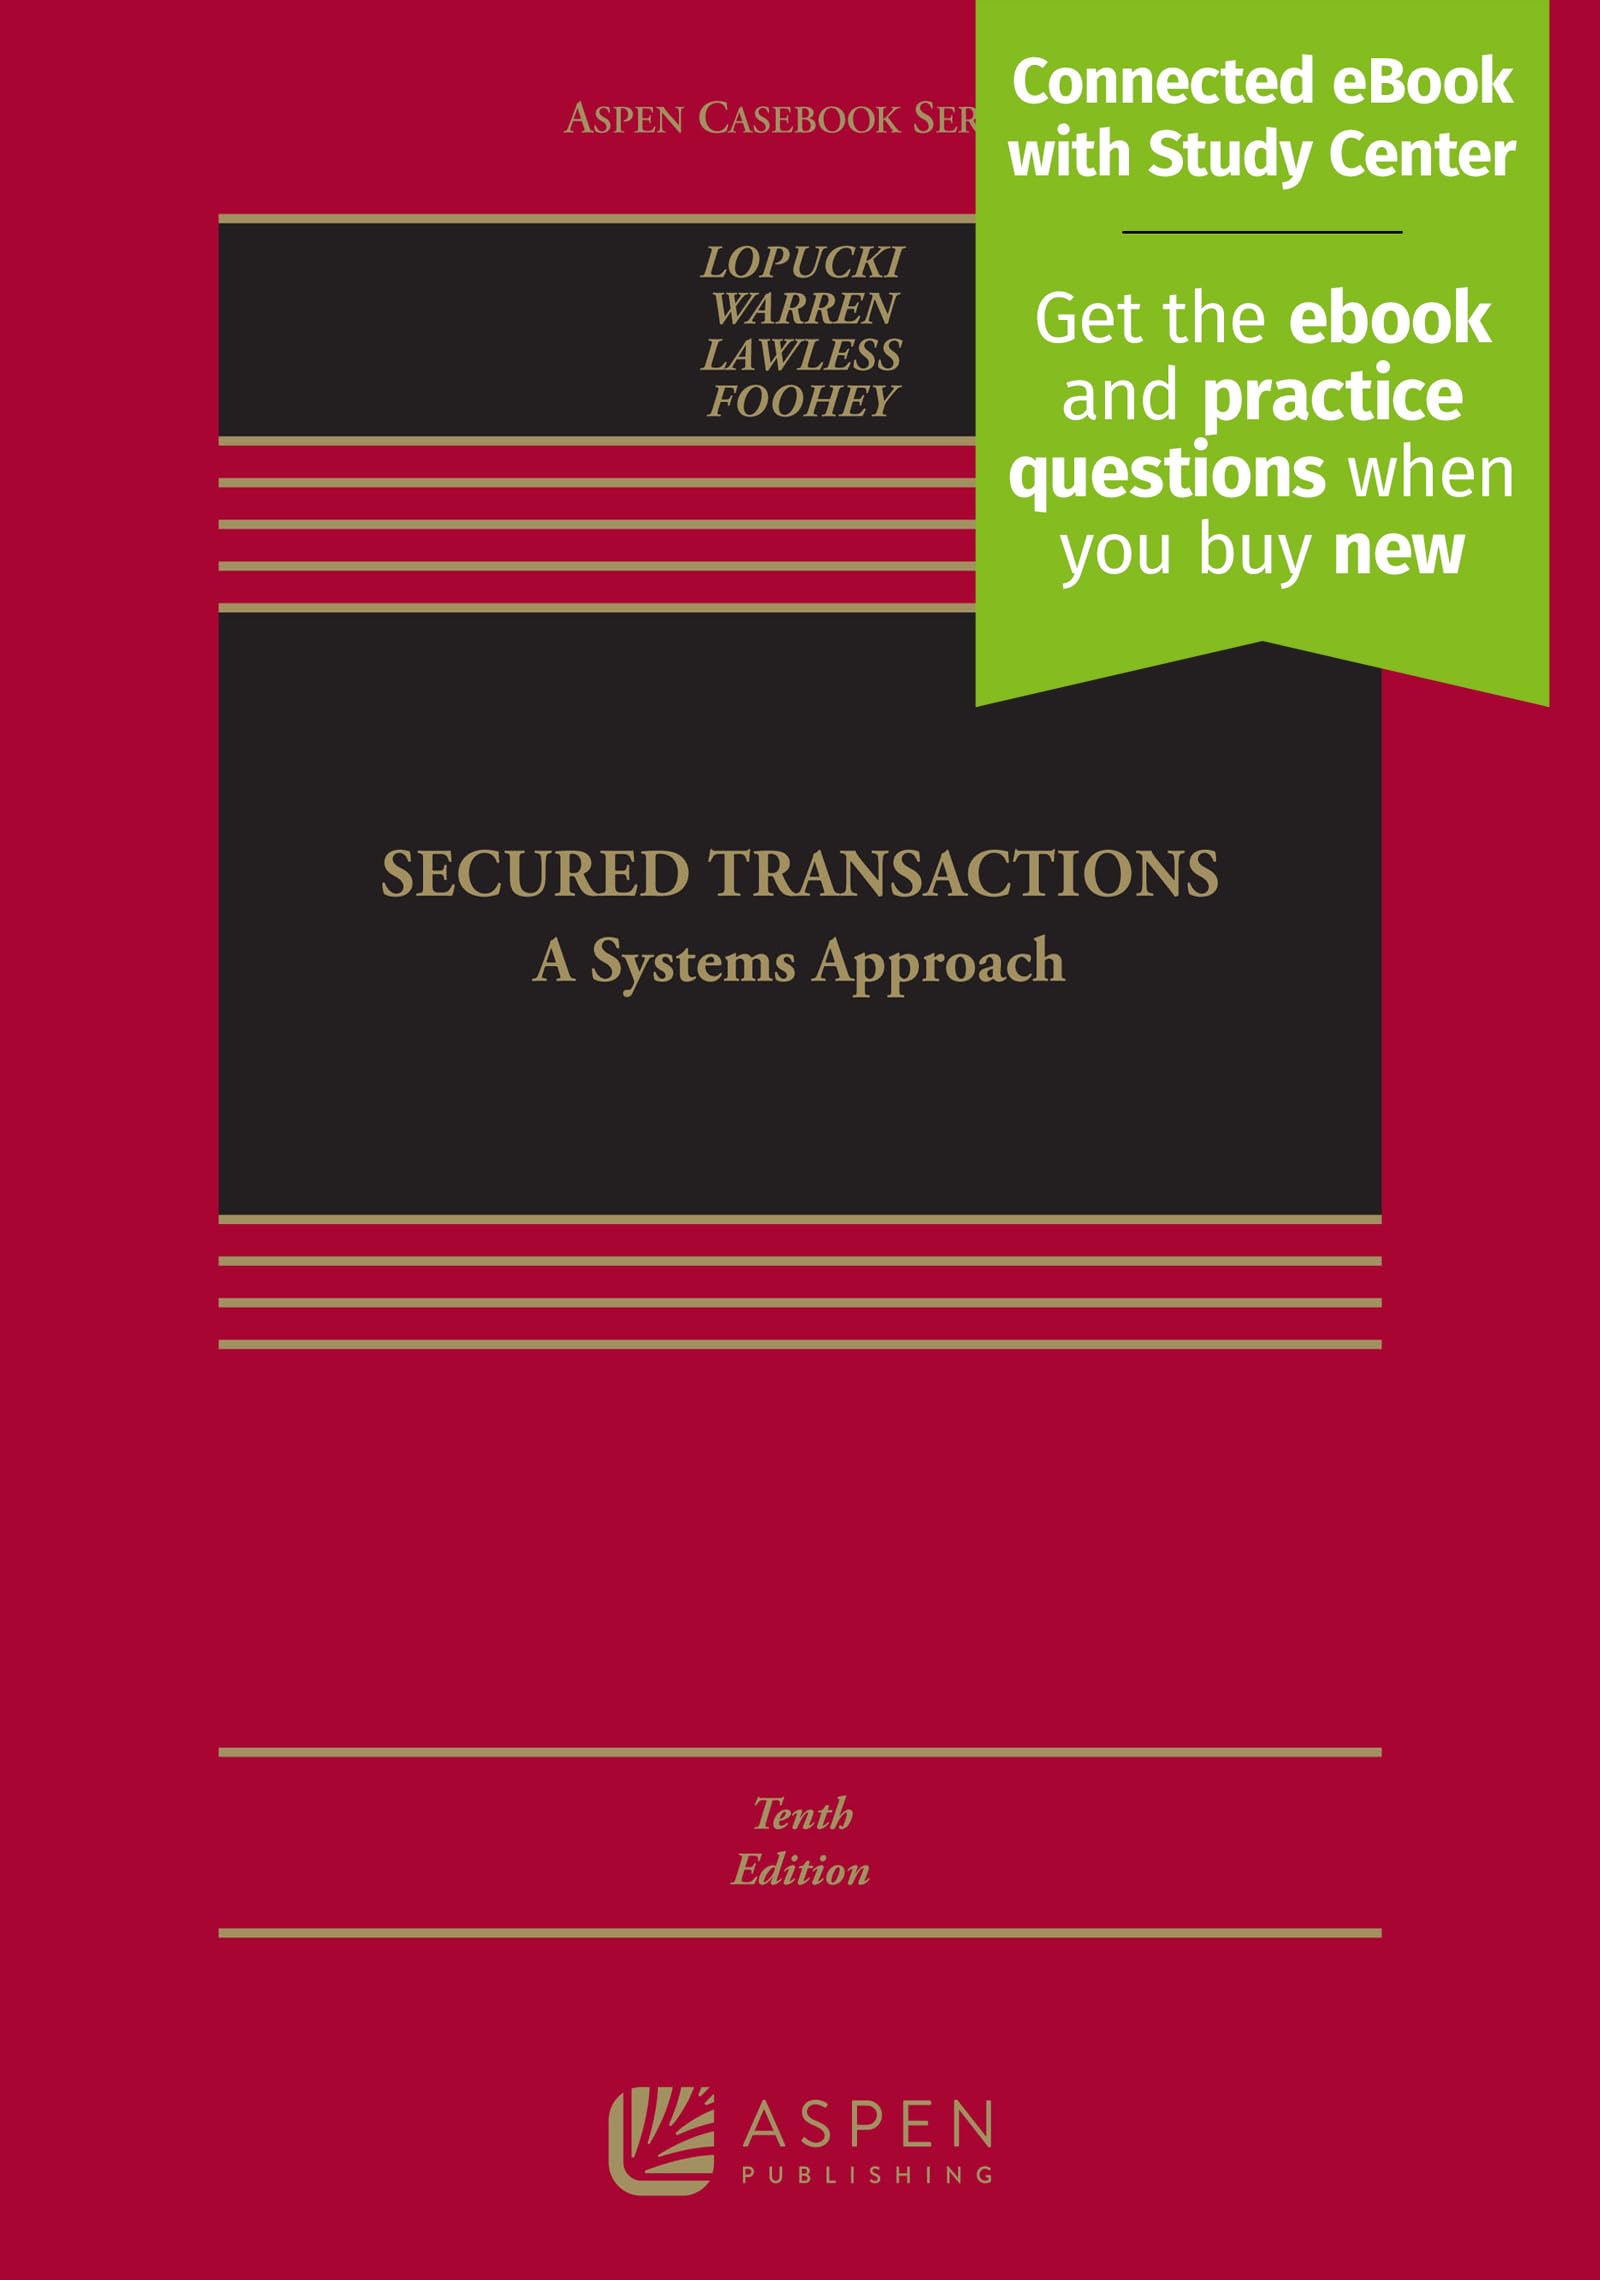 Secured Transactions: A Systems Approach [Connected eBook with Study Center] (Aspen Casebook)